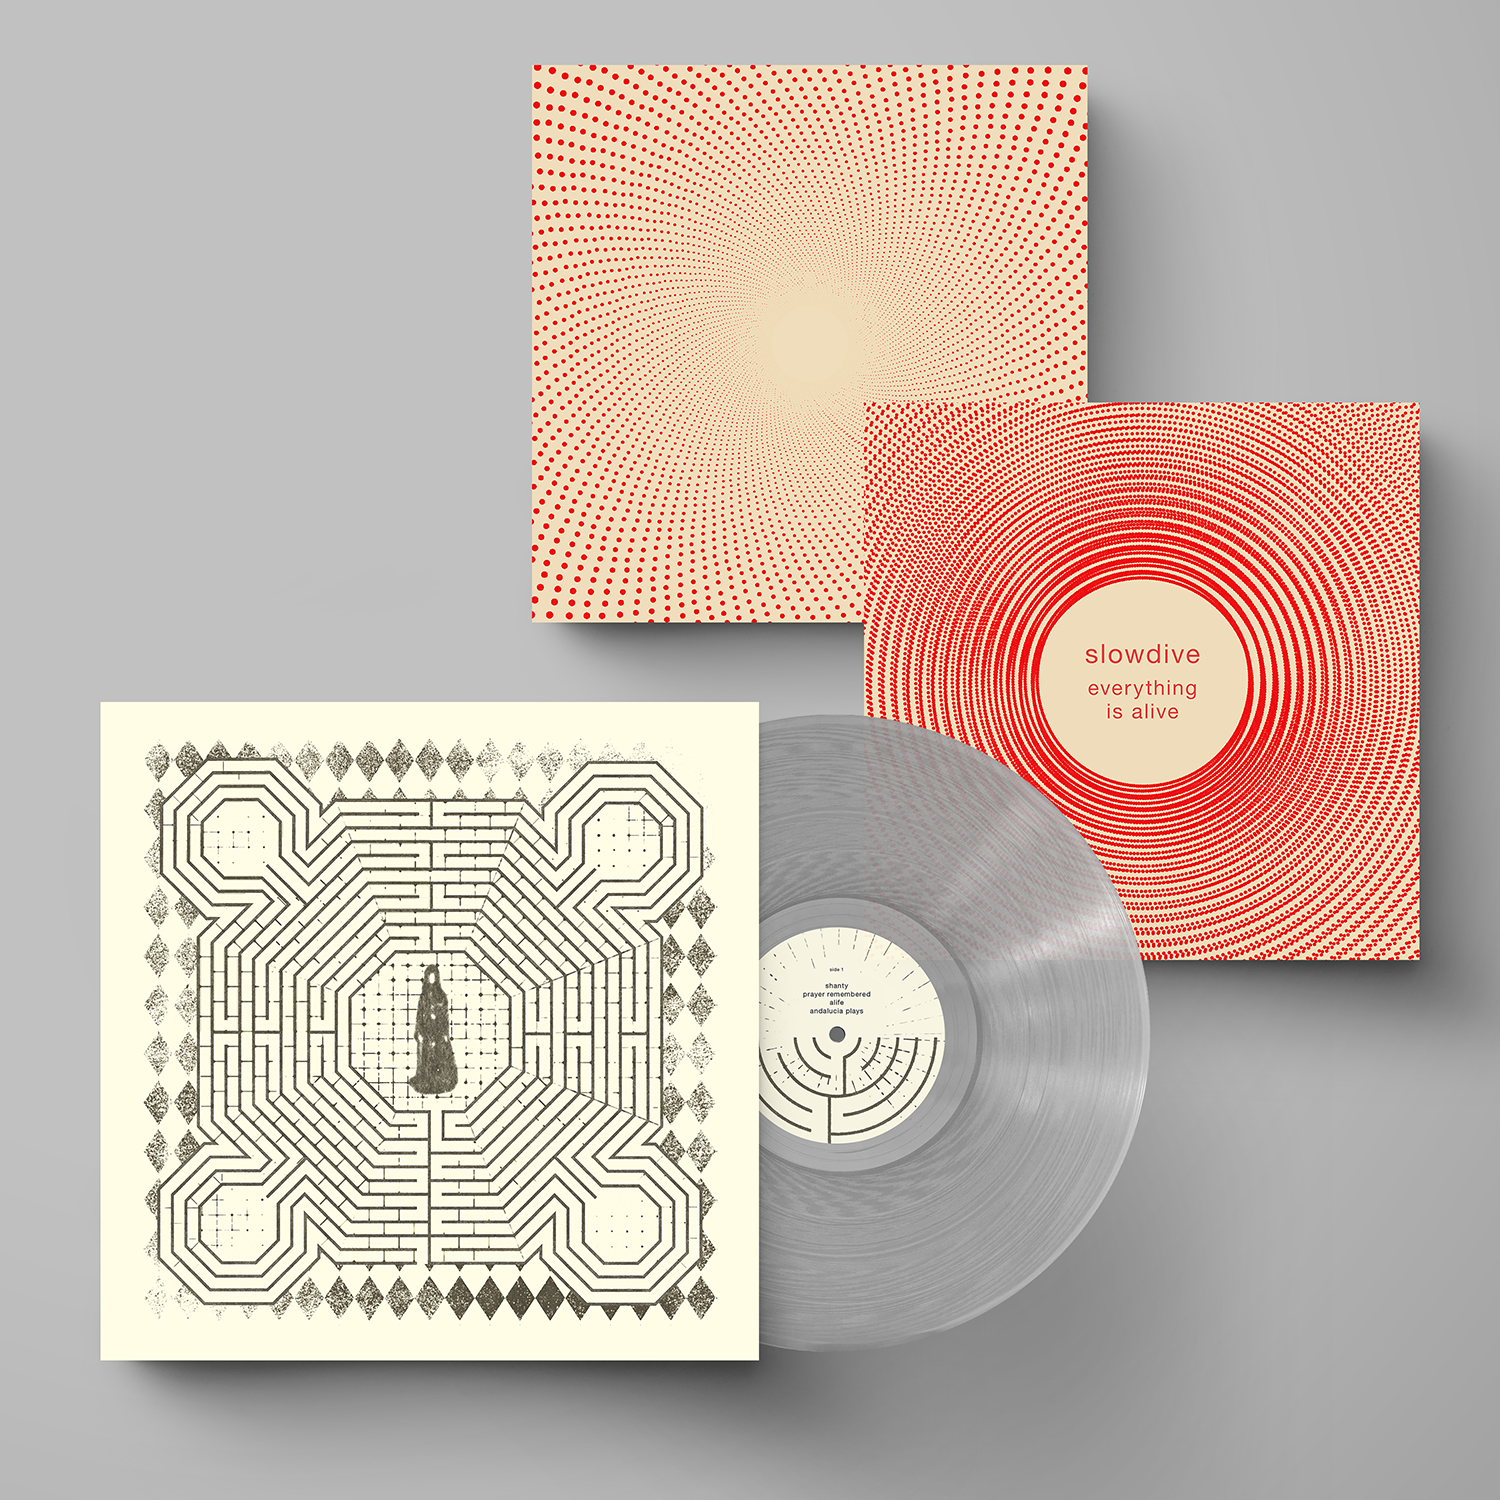 Slowdive - everything is alive: Limited Translucent Clear Vinyl LP +  Exclusive Pr - Recordstore